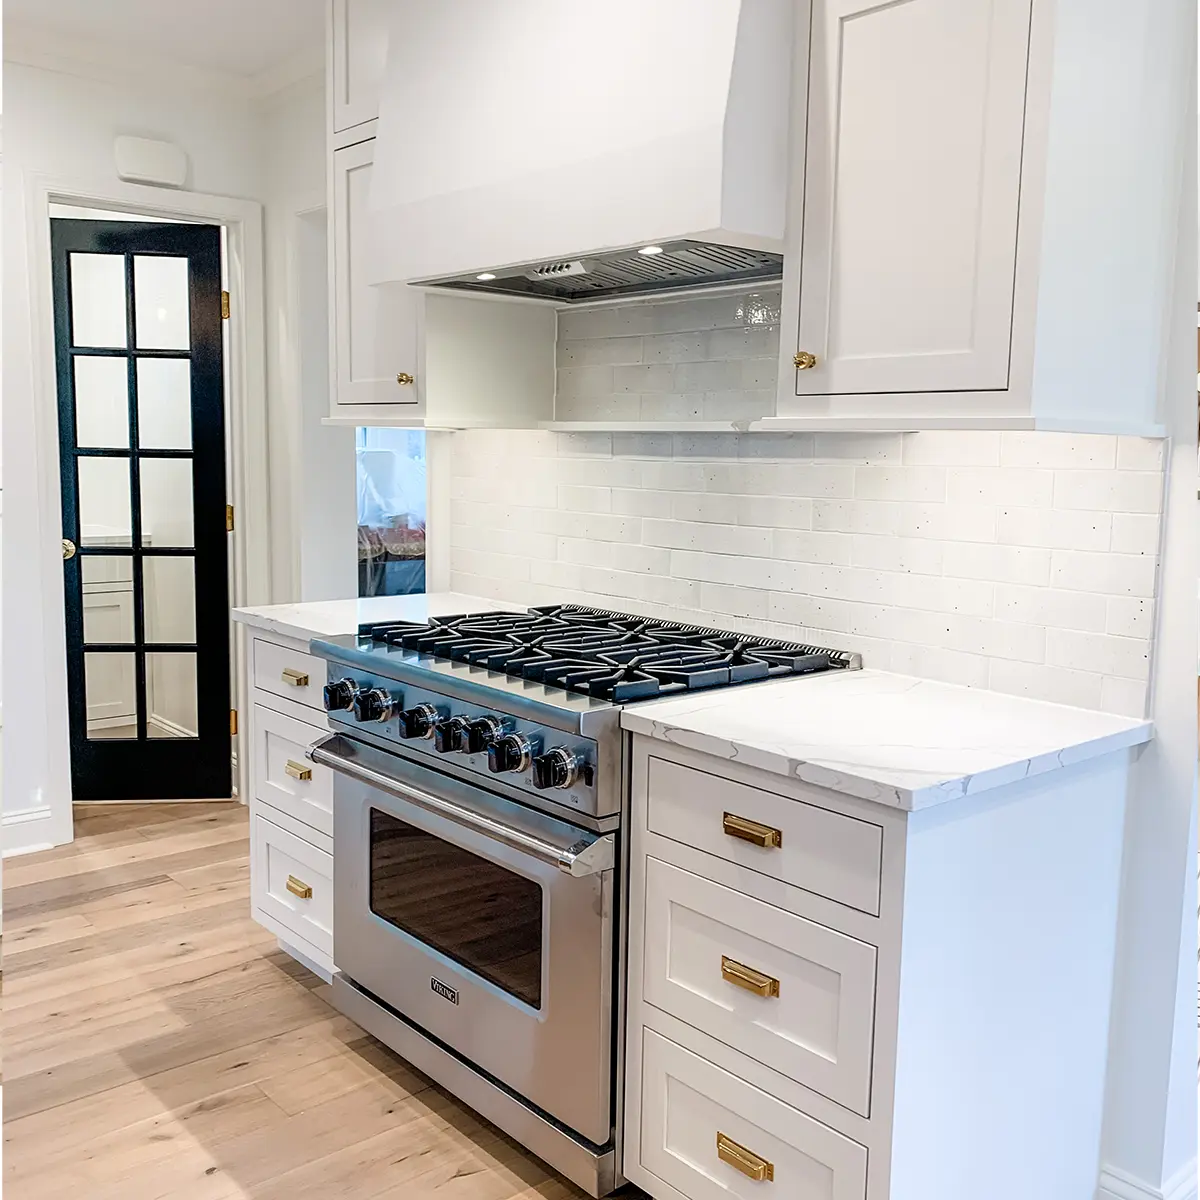 A kitchen range surrounded by cabinets with golden hardware